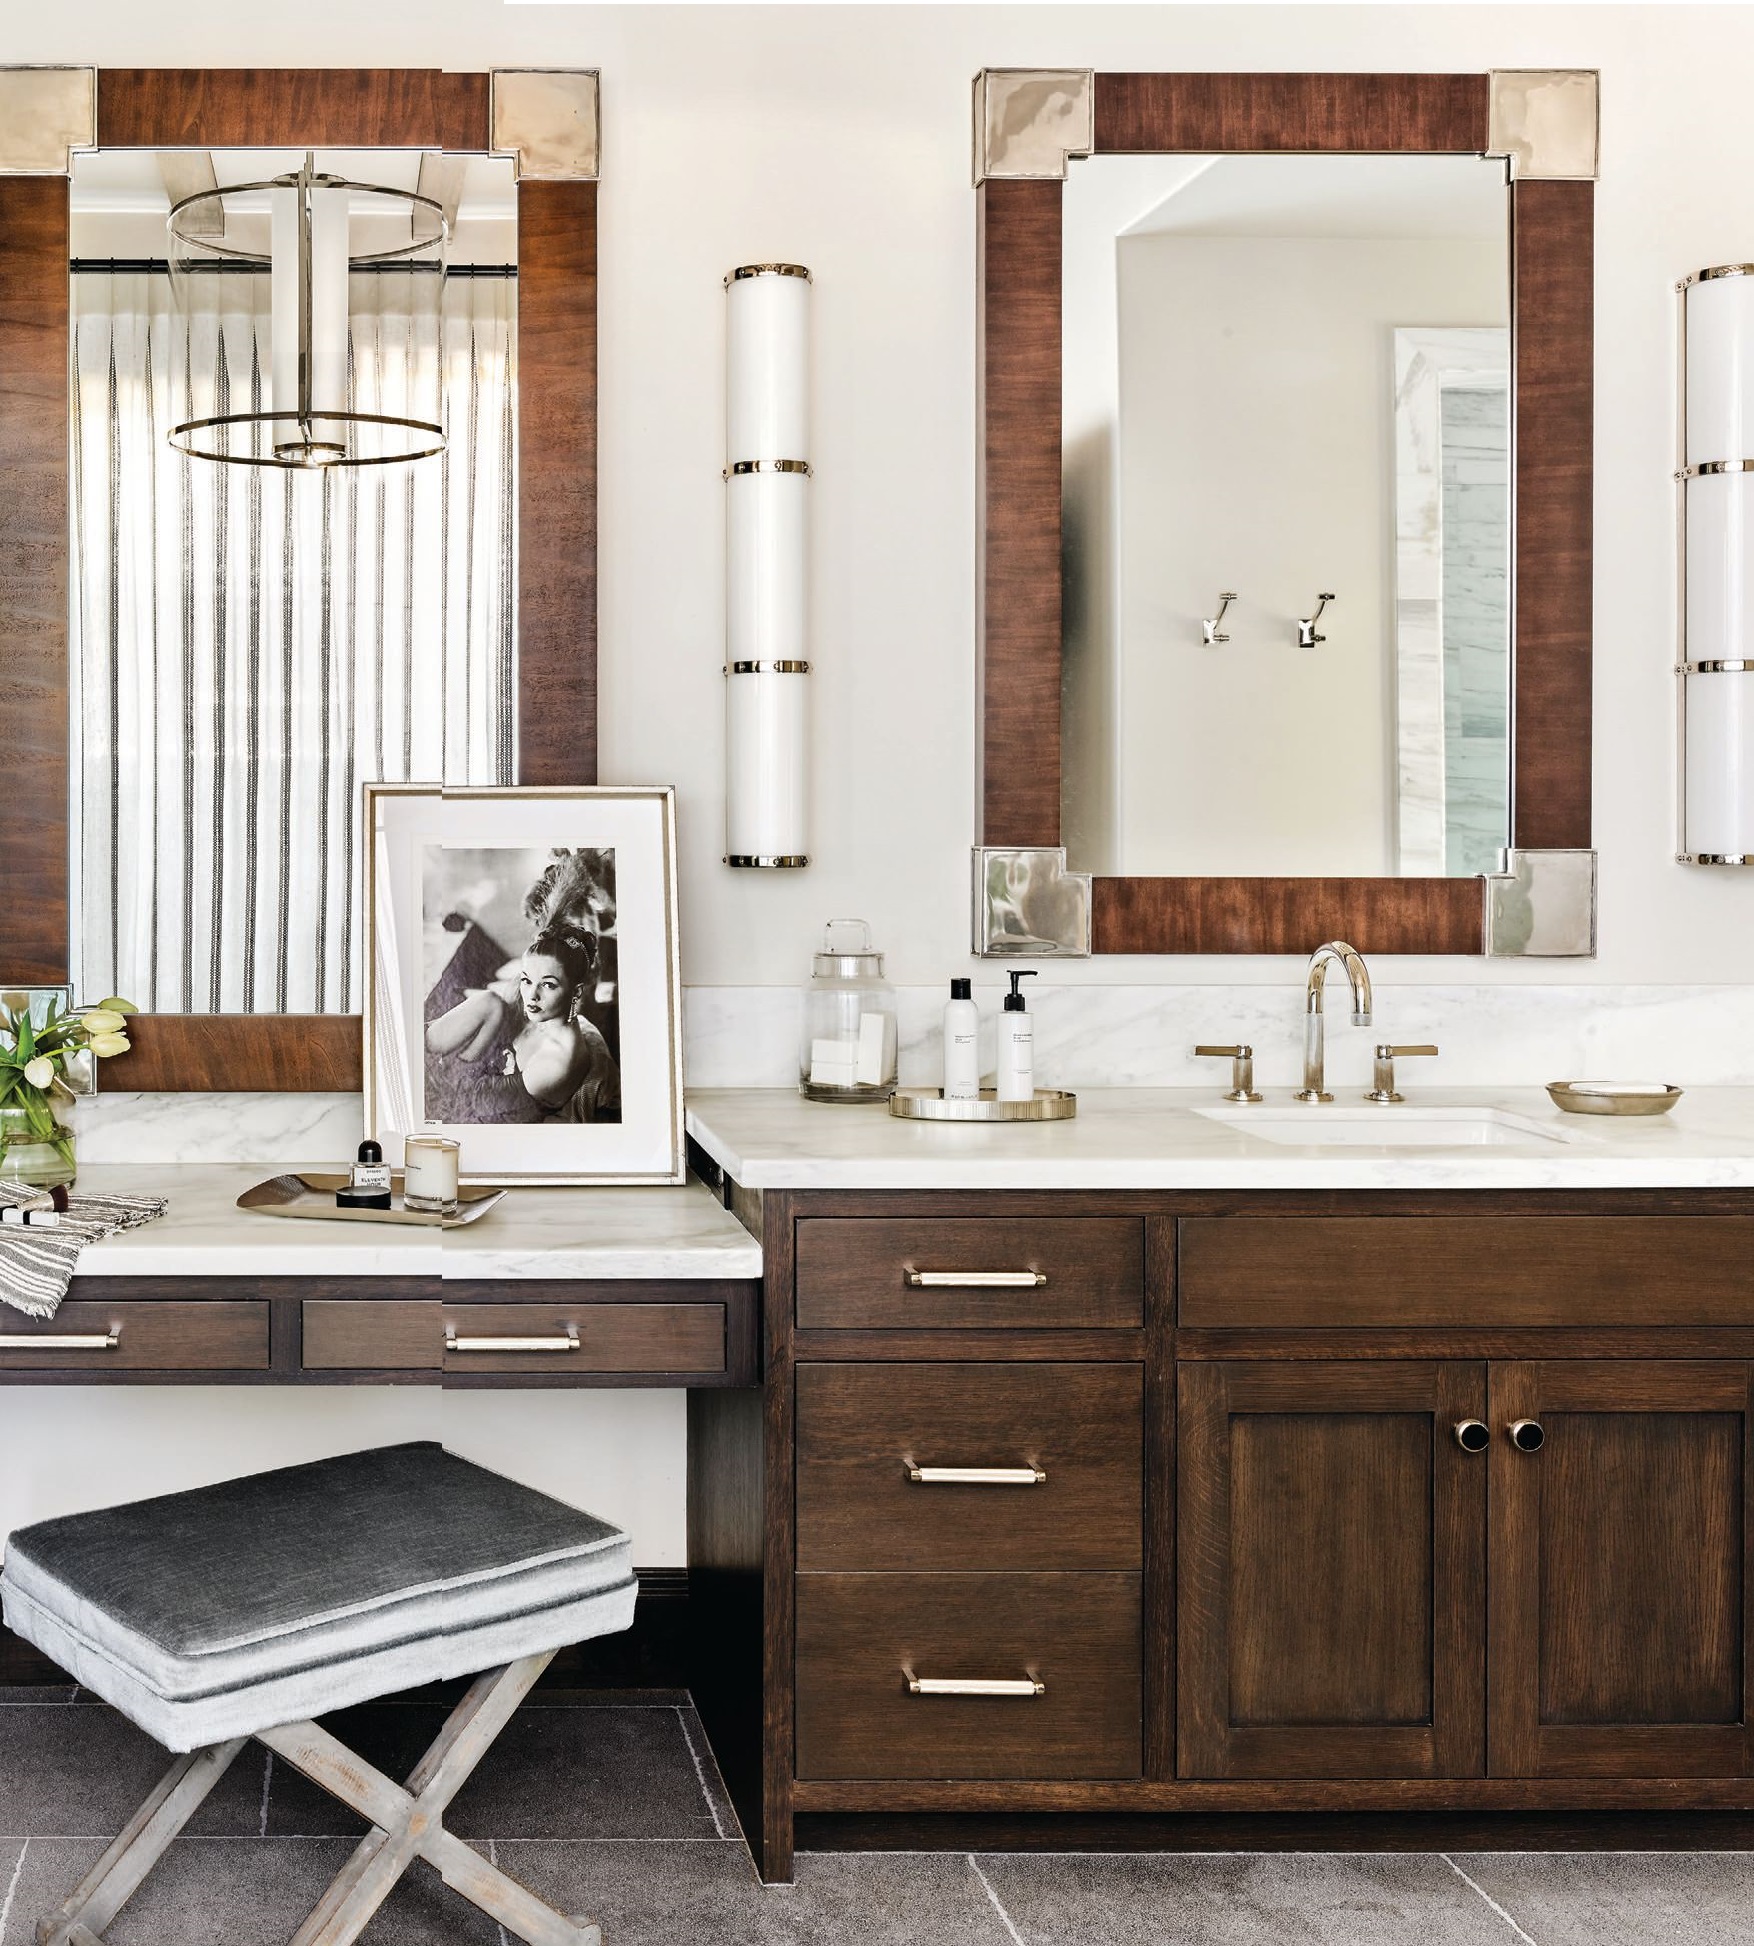 The primary bathroom’s limestone floors by Craftsman Court Ceramics blend harmoniously with vanities by Desert Cove Woodworks and handsome mirrors by Hickory Chair. PHOTOGRAPHED BY WERNER SEGARRA